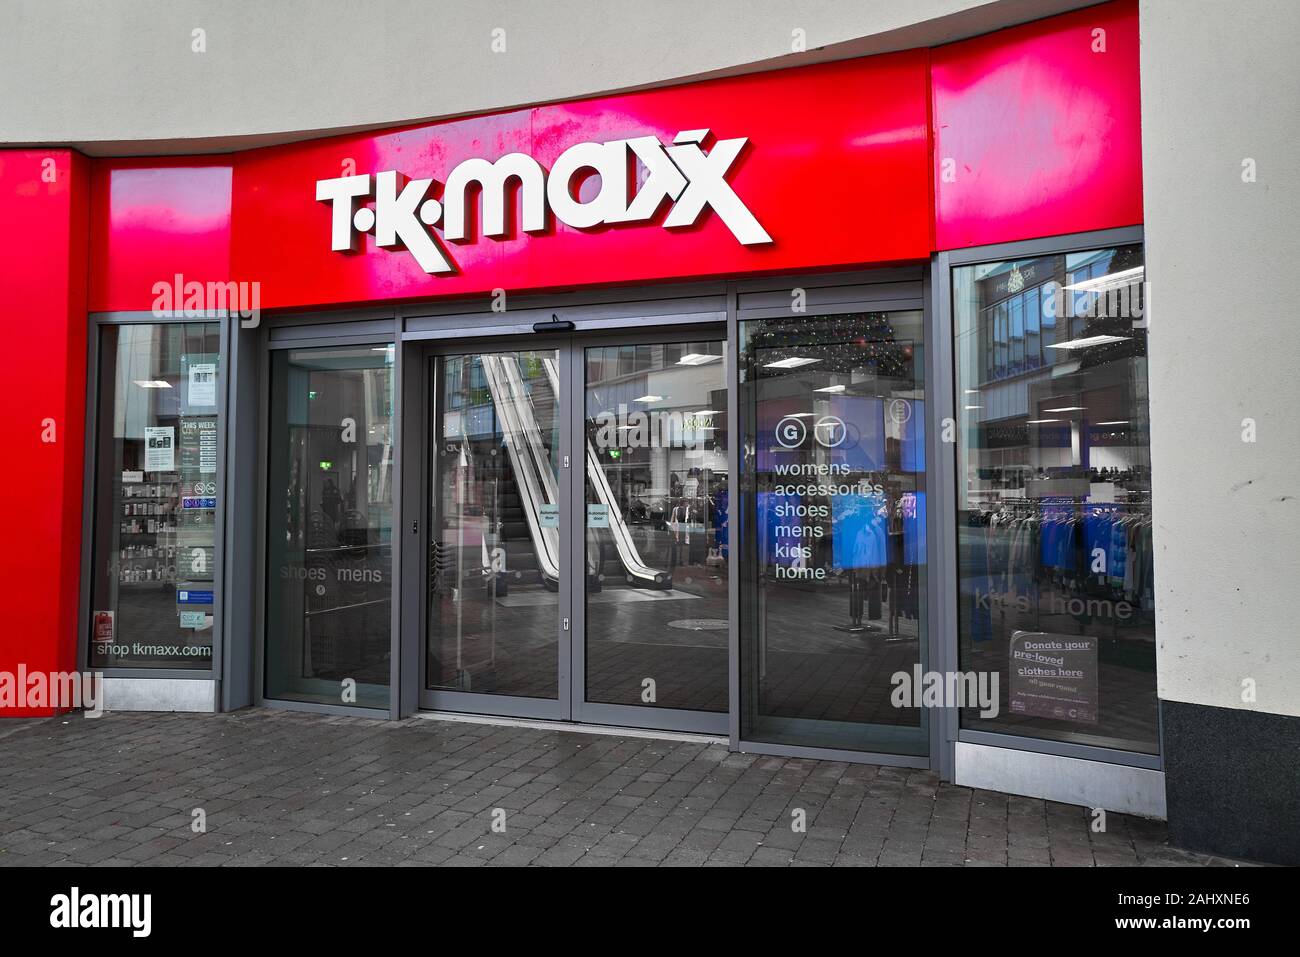 T K Max High Resolution Stock Photography and Images - Alamy